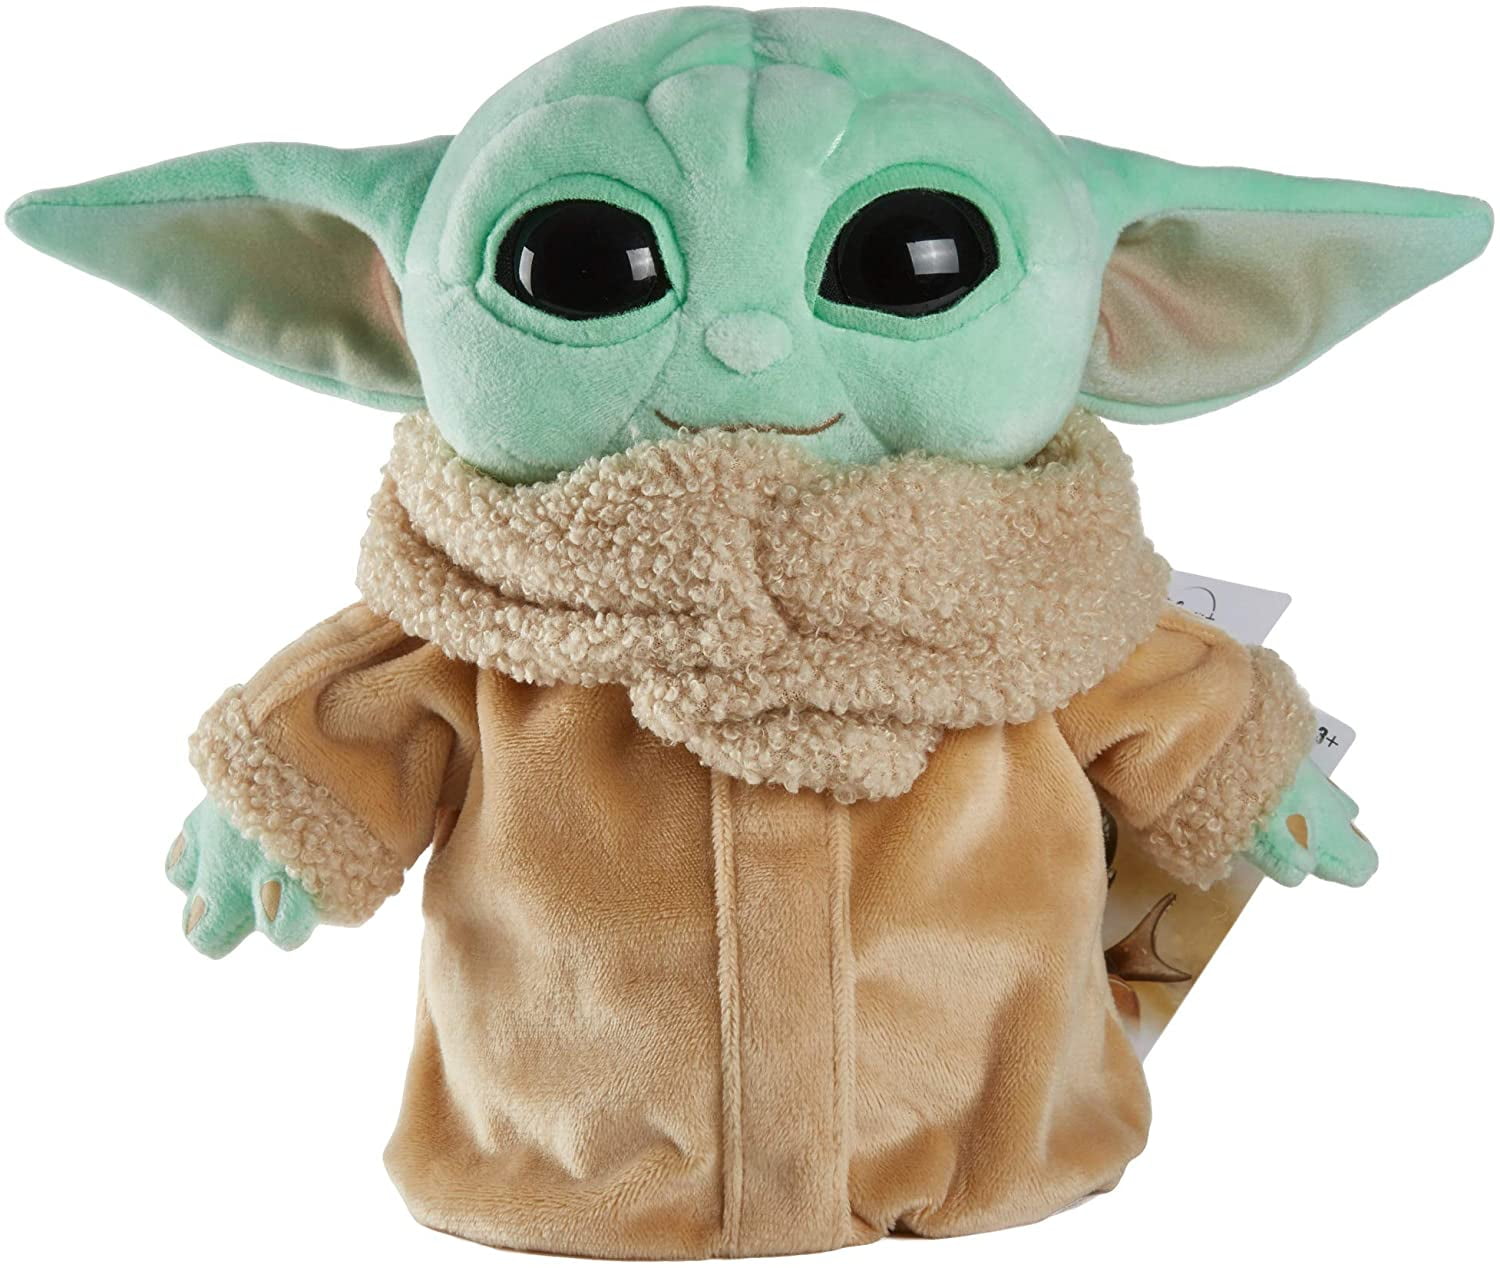 Disney The Child 11 inch Plush Toy GWD87 for sale online 